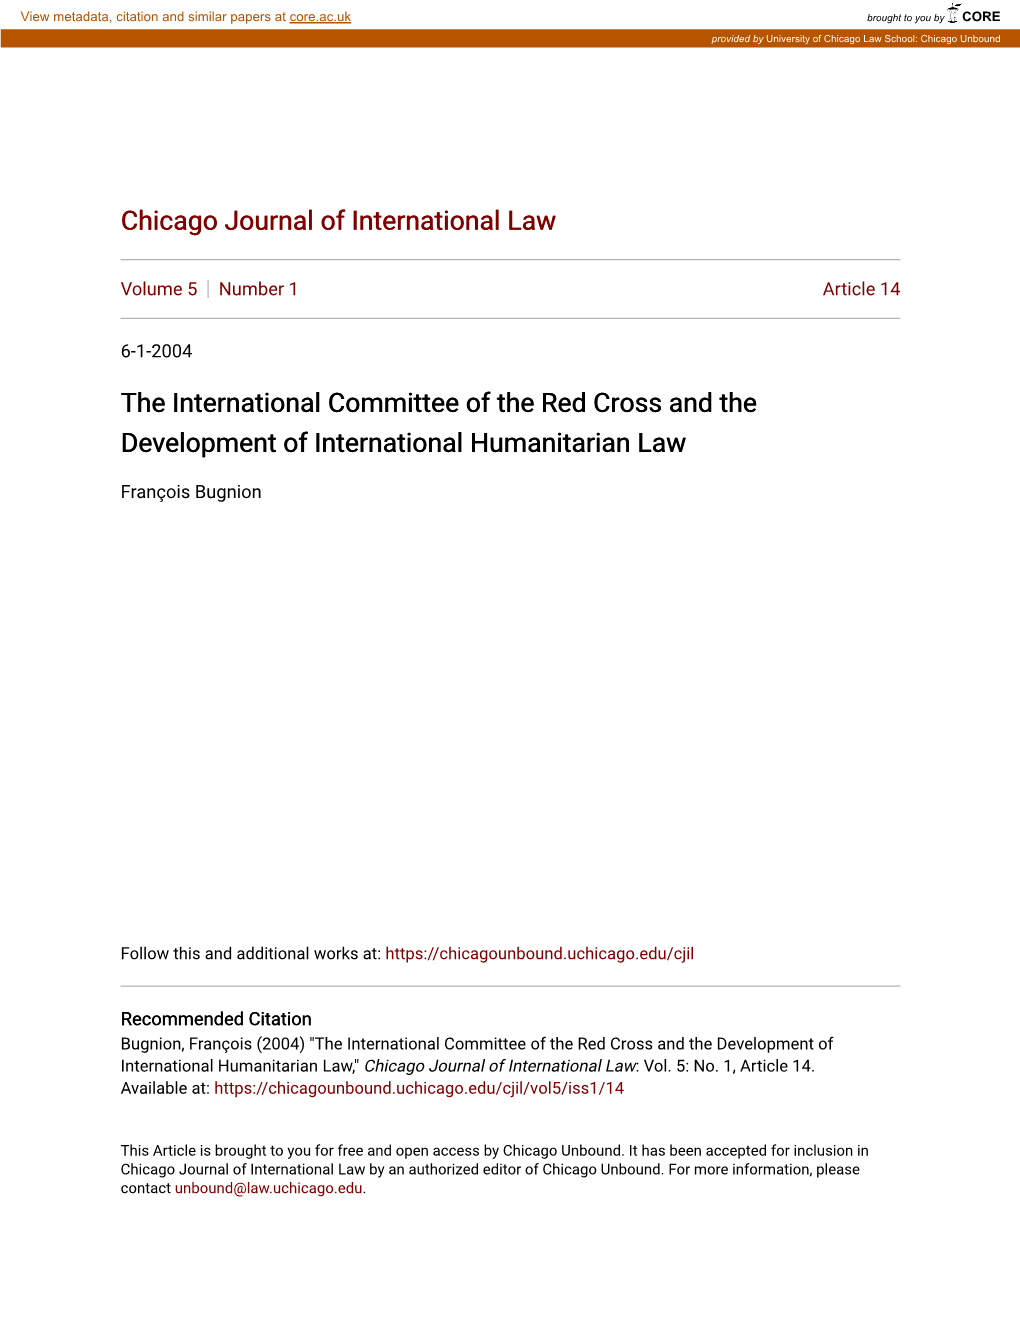 The International Committee of the Red Cross and the Development of International Humanitarian Law